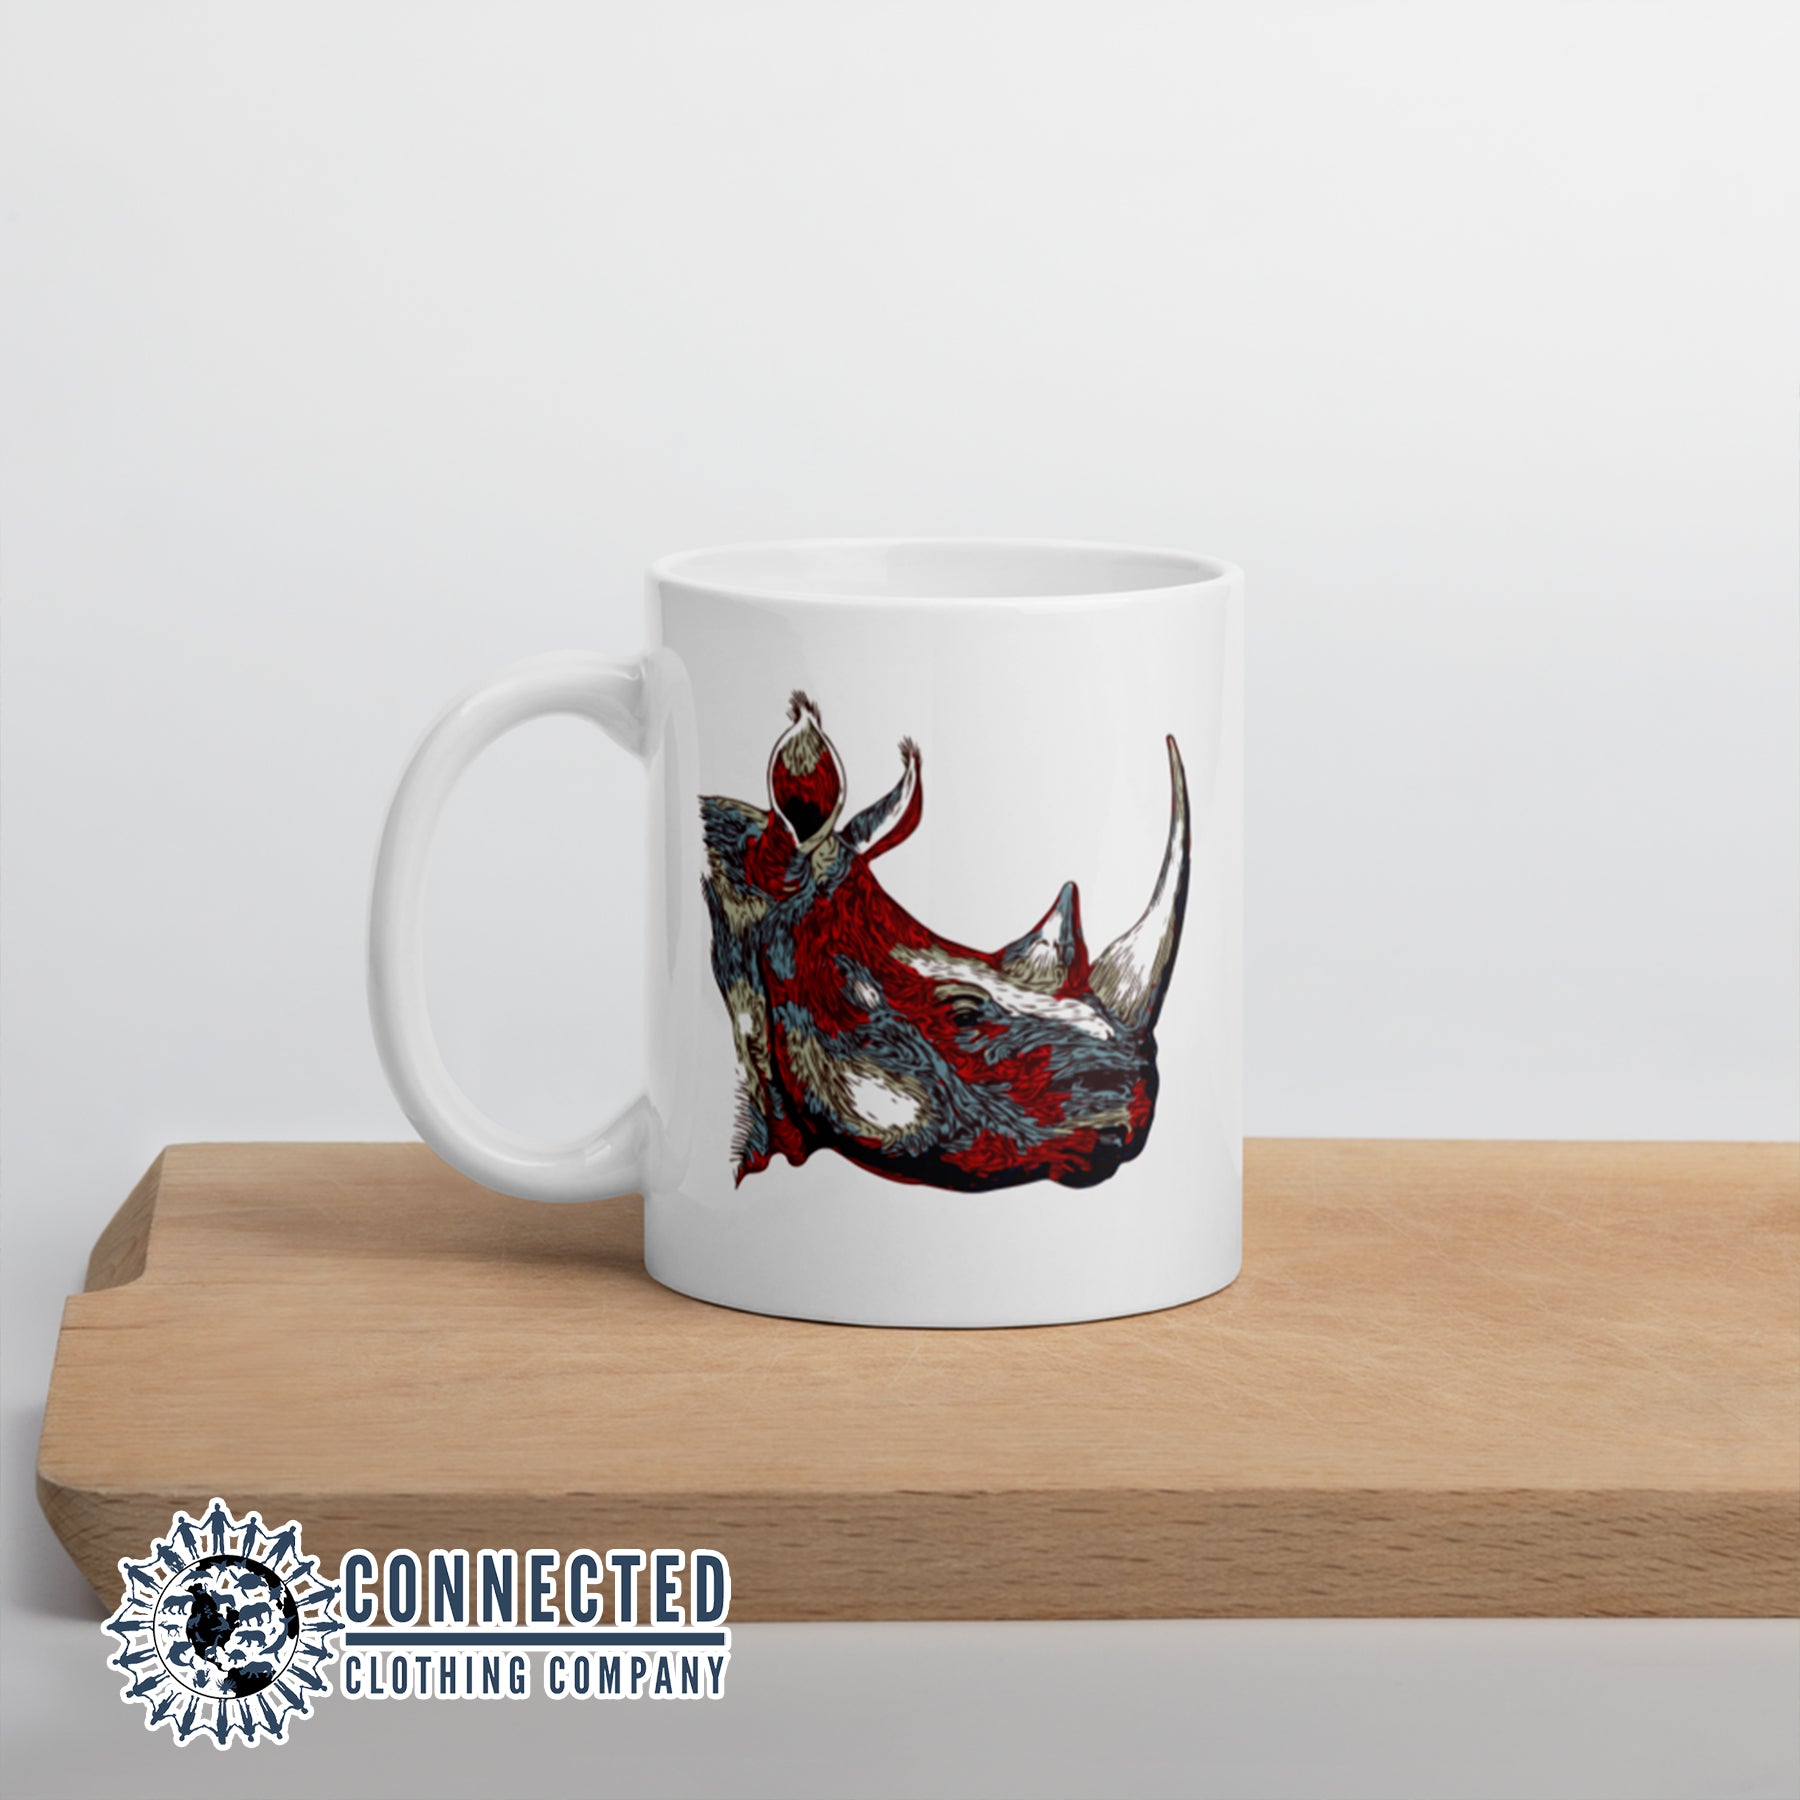 Vanishing Into Extinction Classic Mug - Connected Clothing Company - Ethically and Sustainable Clothing - 10% of proceeds are donated to rhino conservation